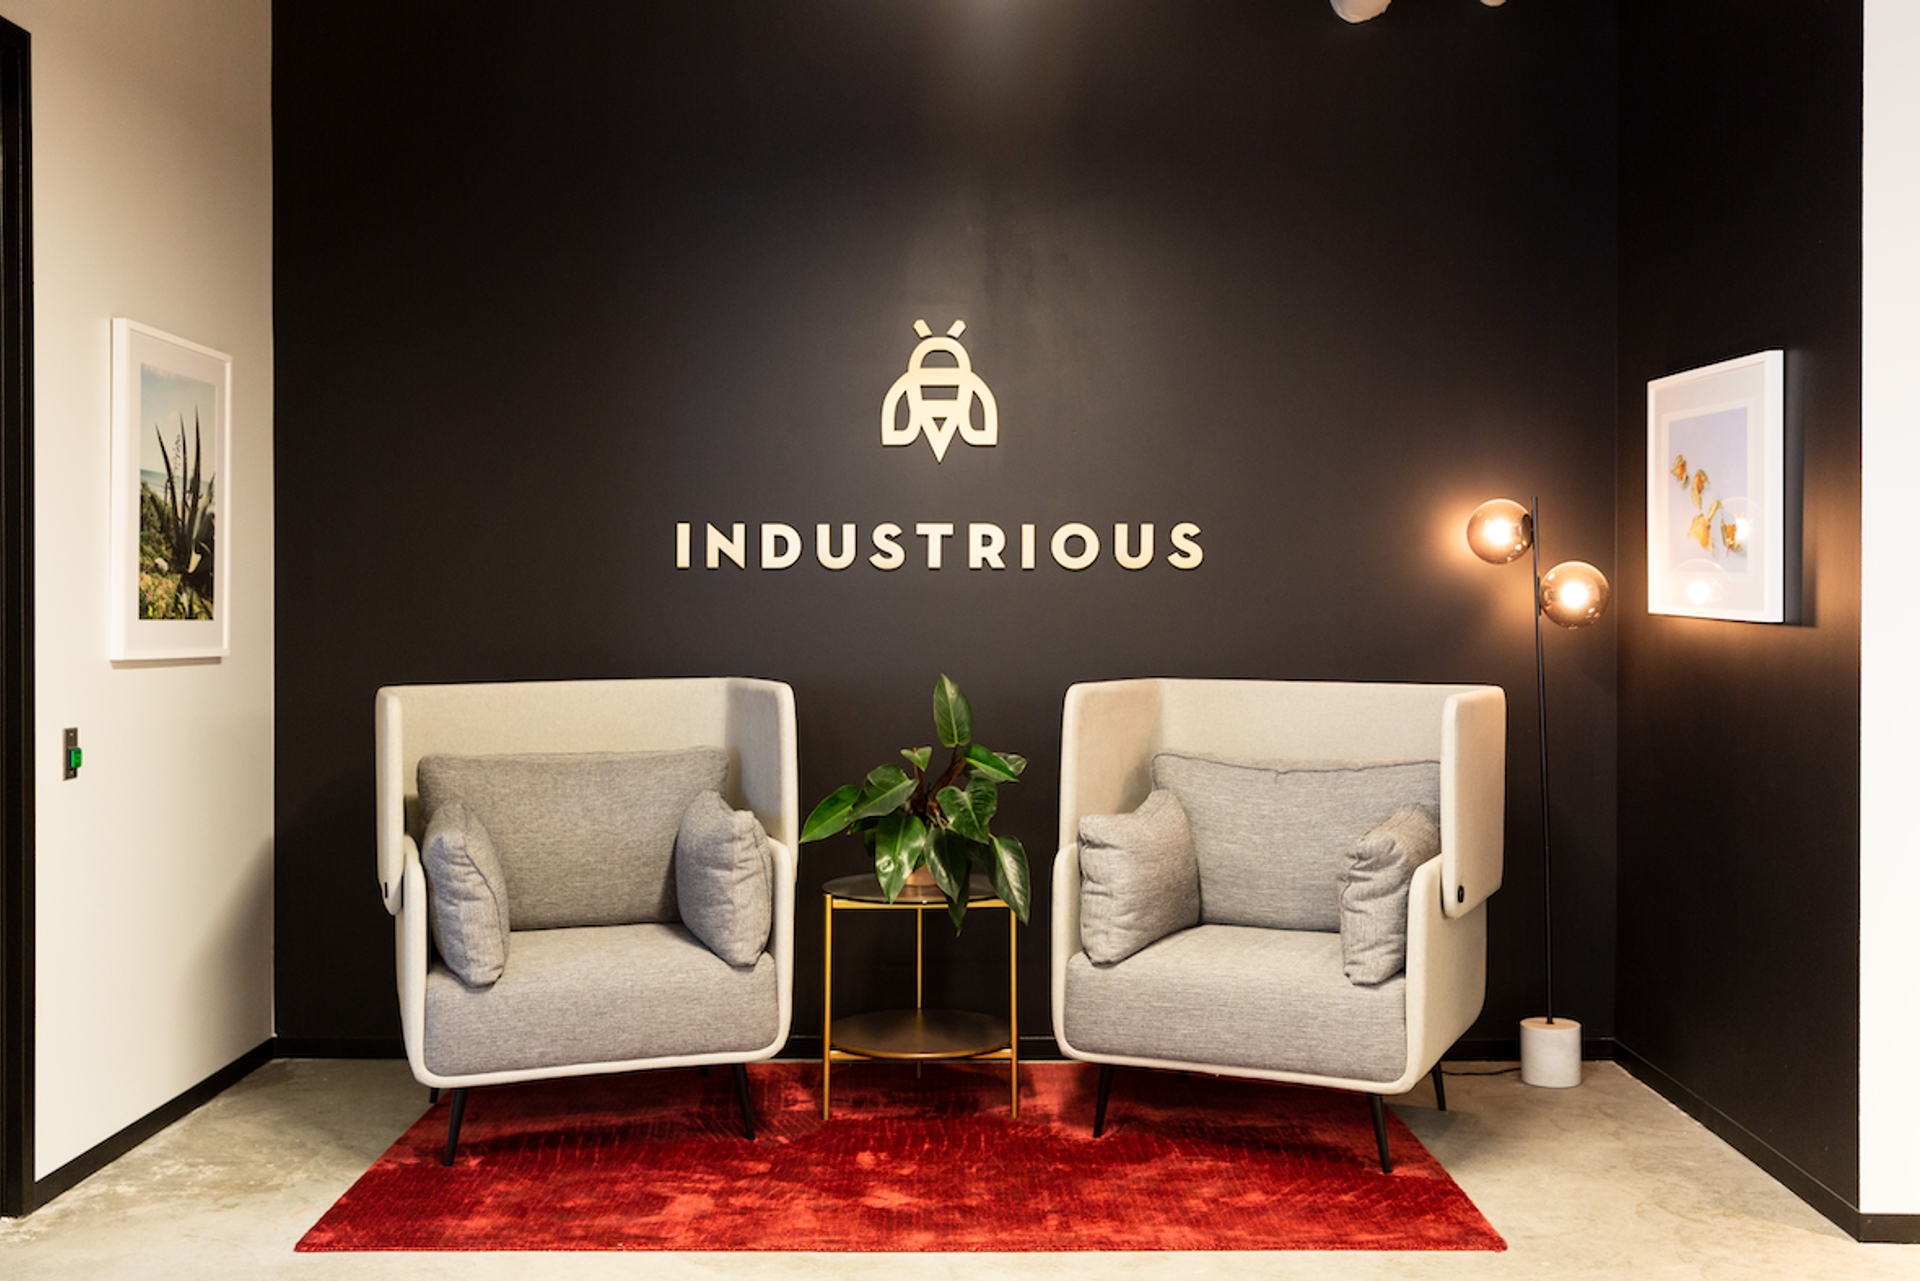 Industrious: Seaport Co-Working Day